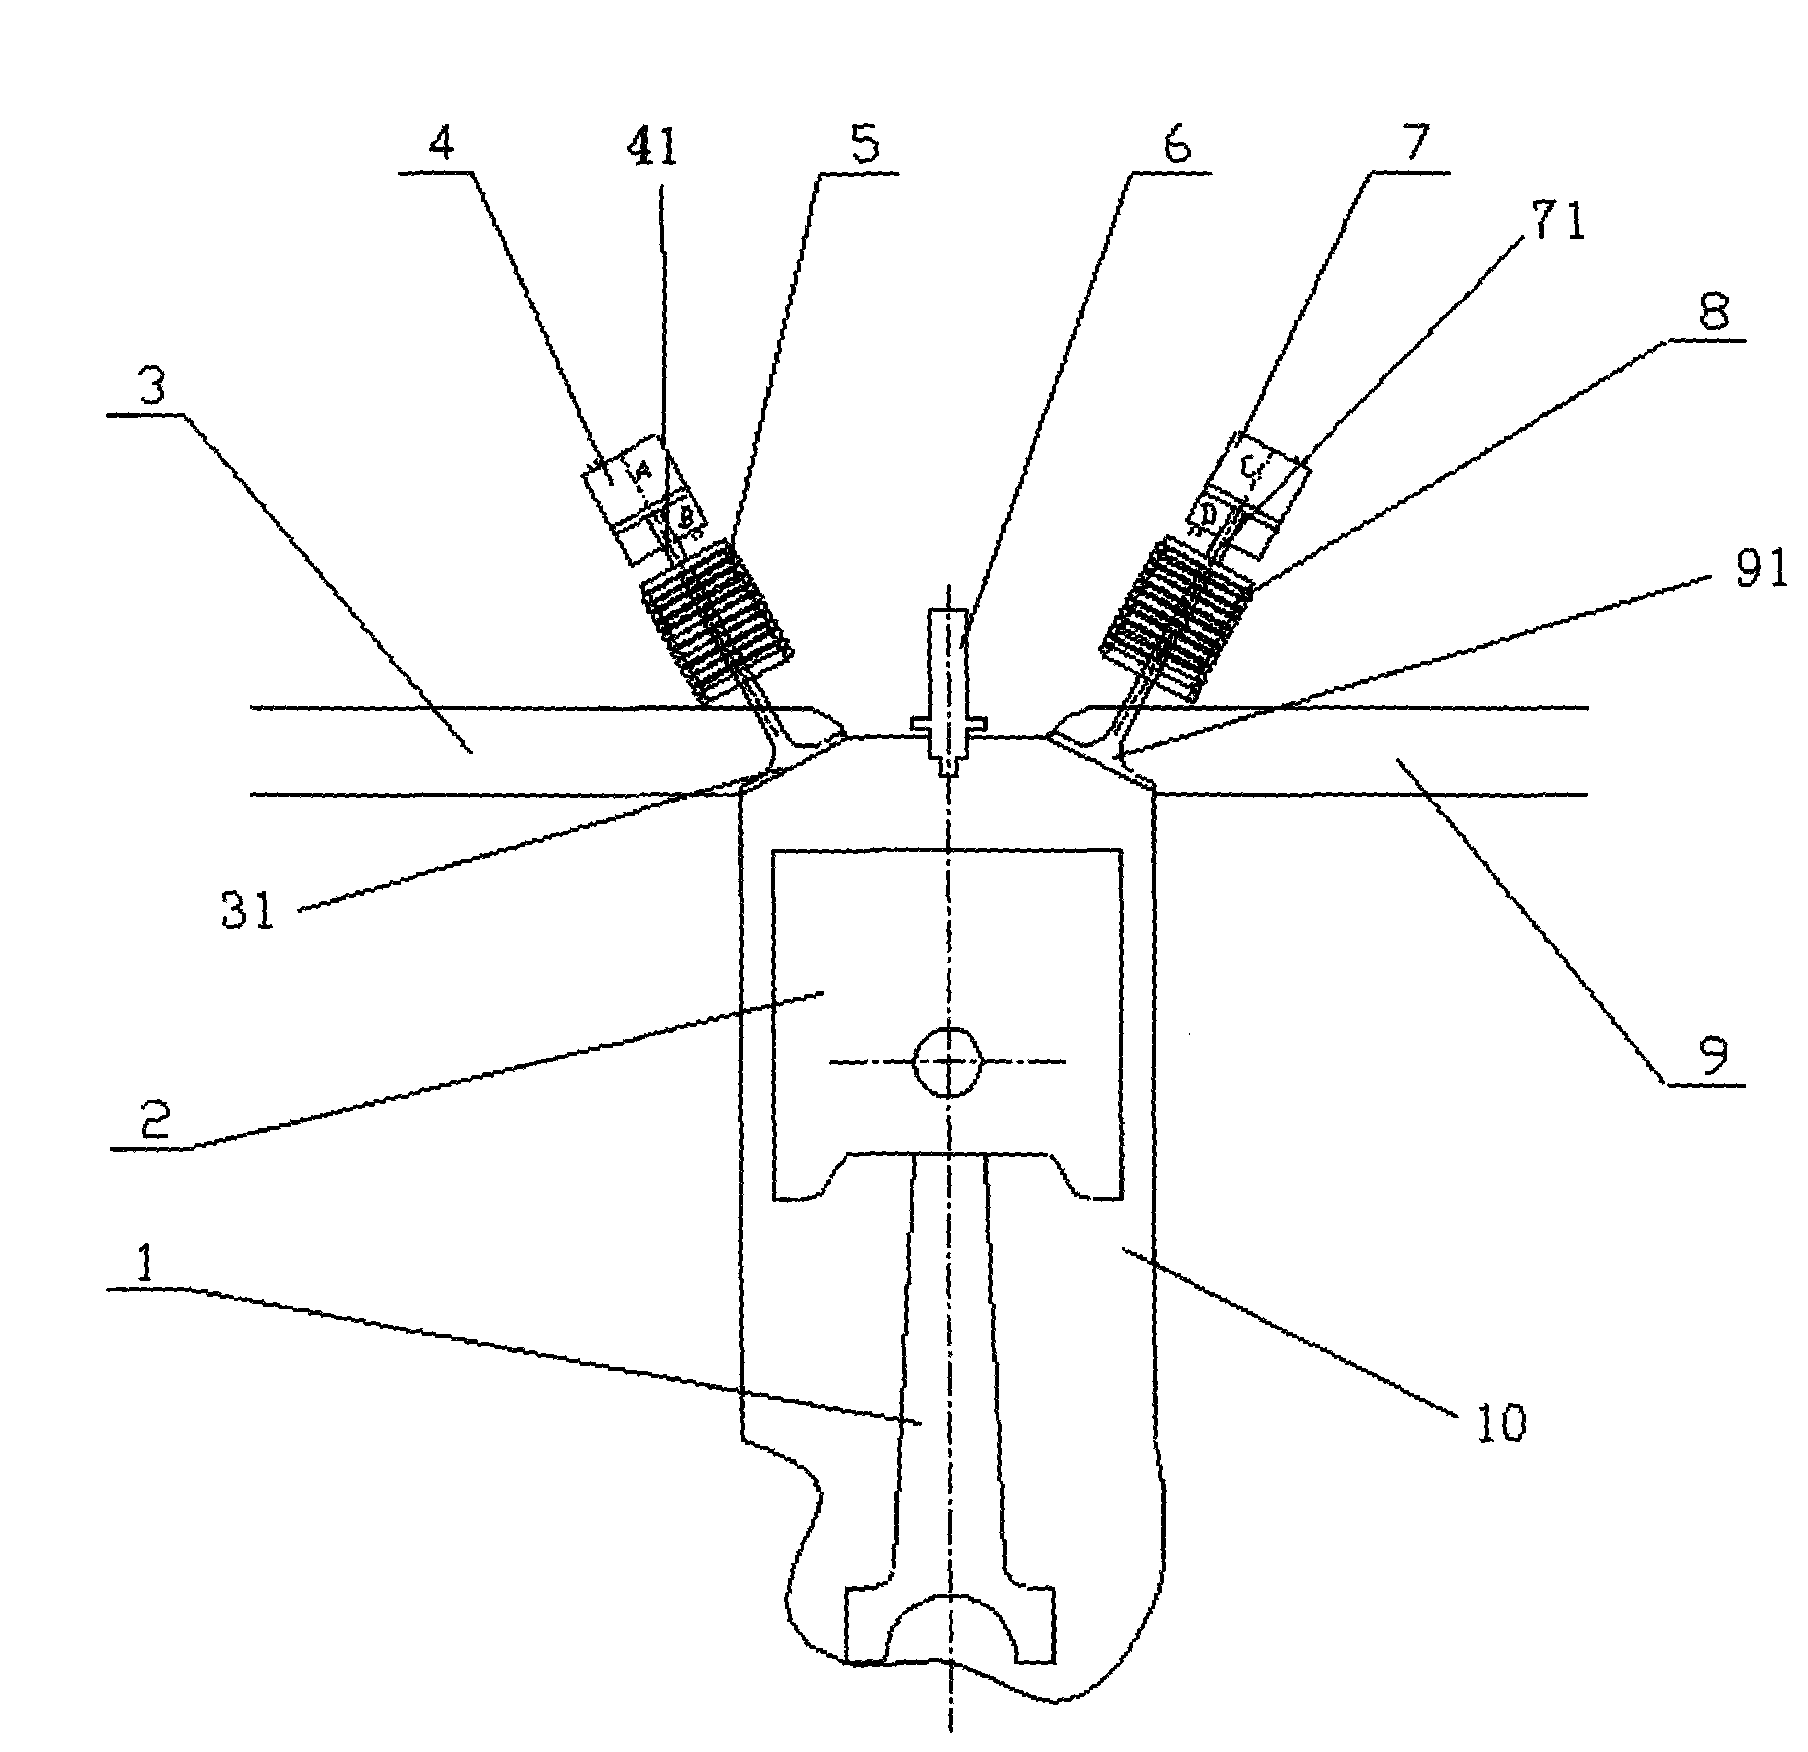 Continuous and variable gas distribution control system of spark ignition engine